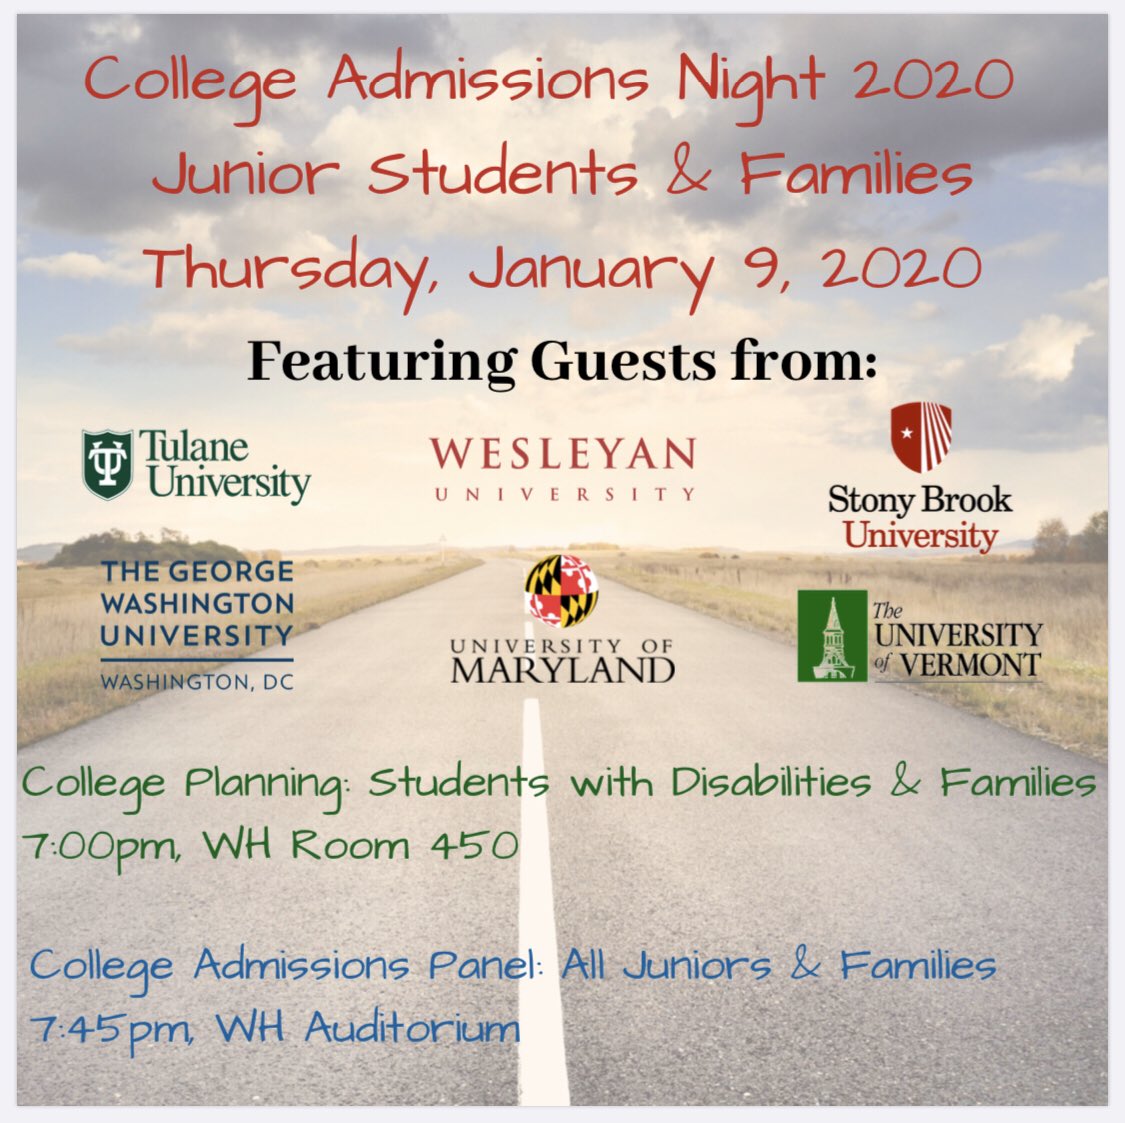 Junior Students and Families•Please join us Thurs evening at 7:45 for College Admissions Night 2020 • College reps from 6 universities will be here to answer your questions. @wesleyan_u @stonybrooku @Tulane #georgewashingtonu #vermont #maryland @EastWillistonSD @WheatleySchool